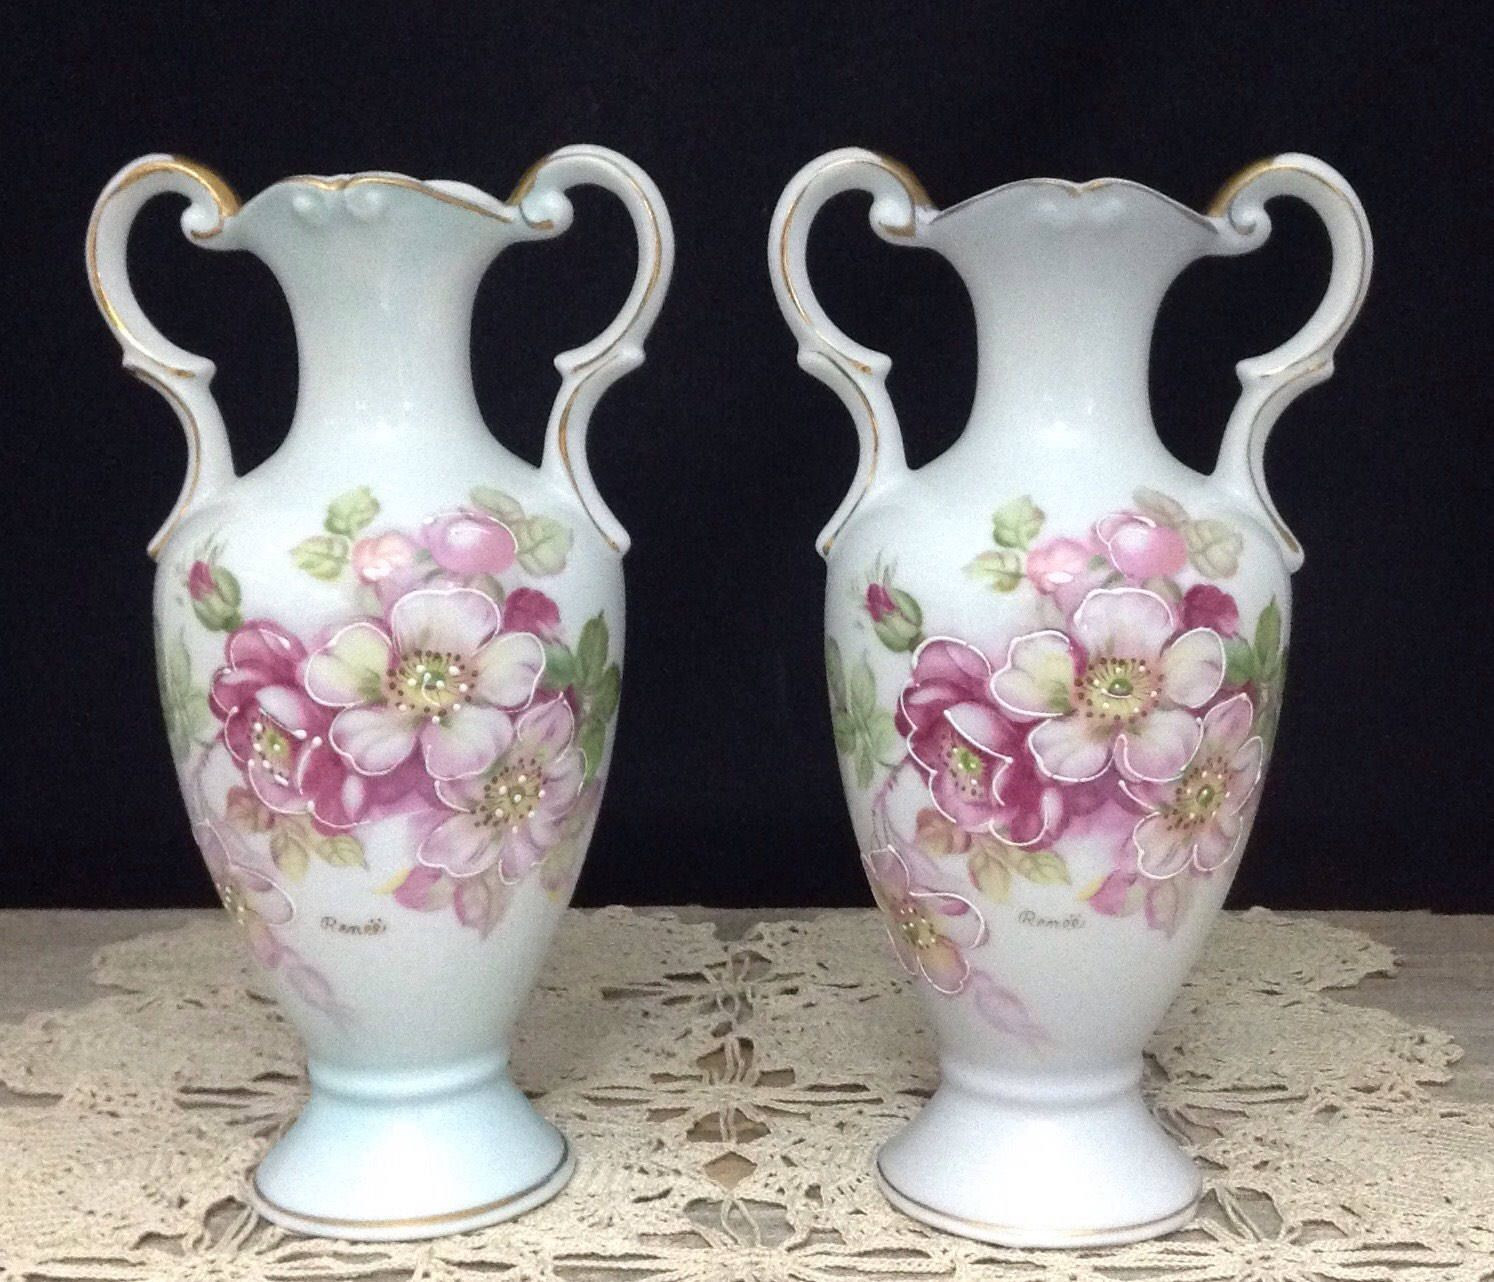 12 attractive Chinese Flower Vase 2024 free download chinese flower vase of german porcelain vase pair hand painted porcelain vase kalk with german porcelain vase pair hand painted porcelain vase kalk porcelain vase set pink flower vase vintag